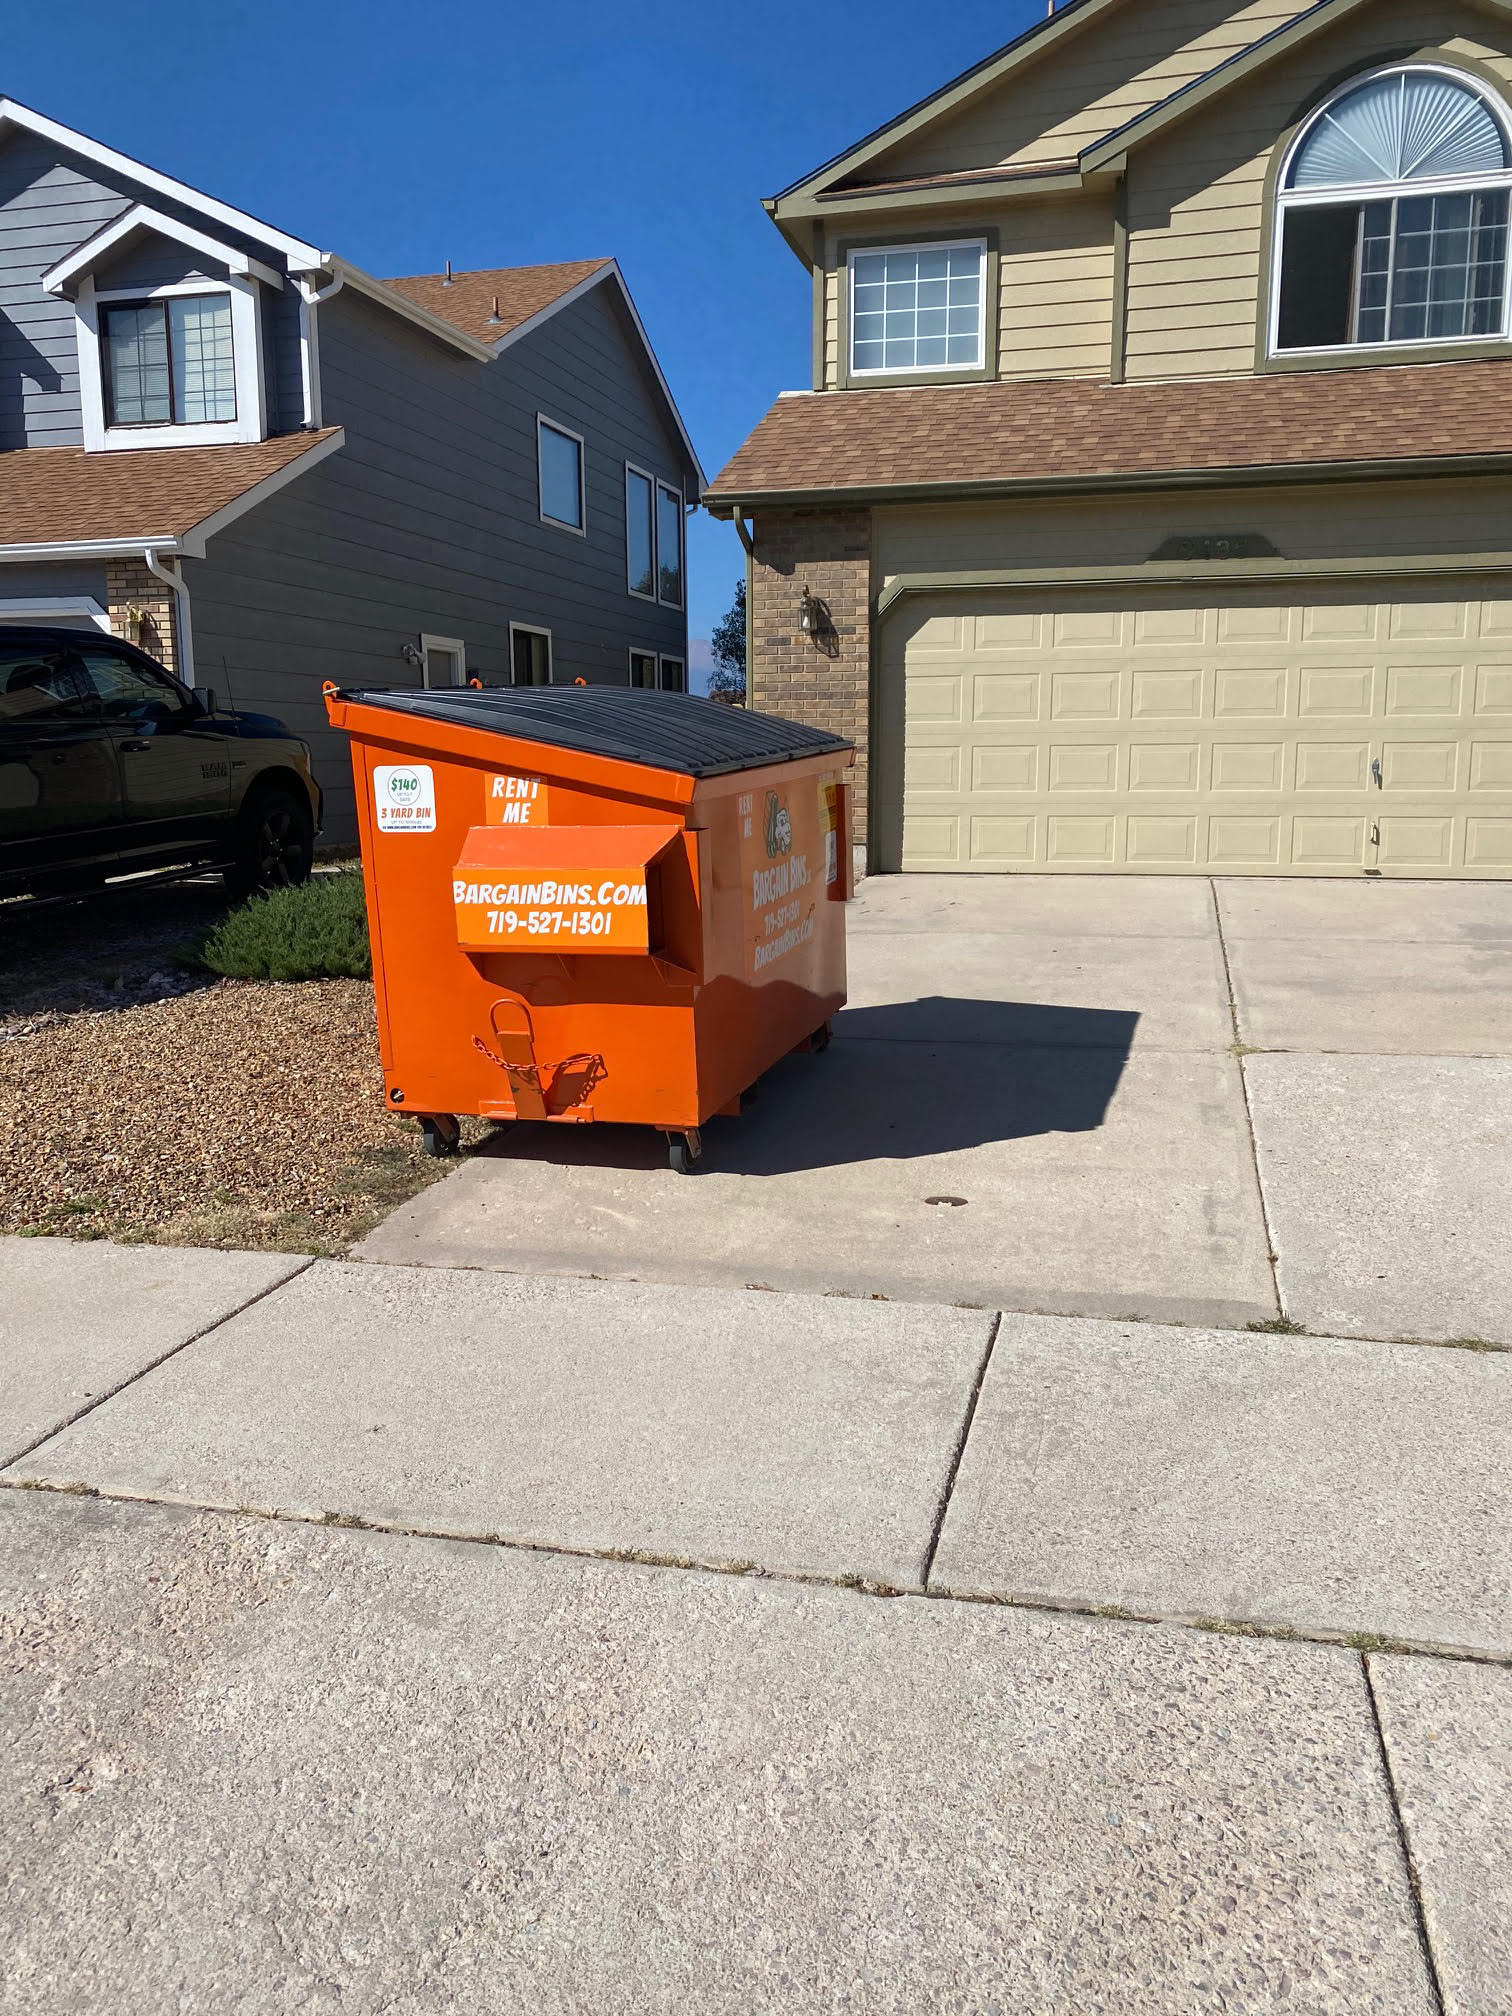 Six reasons to rent a residential dumpster